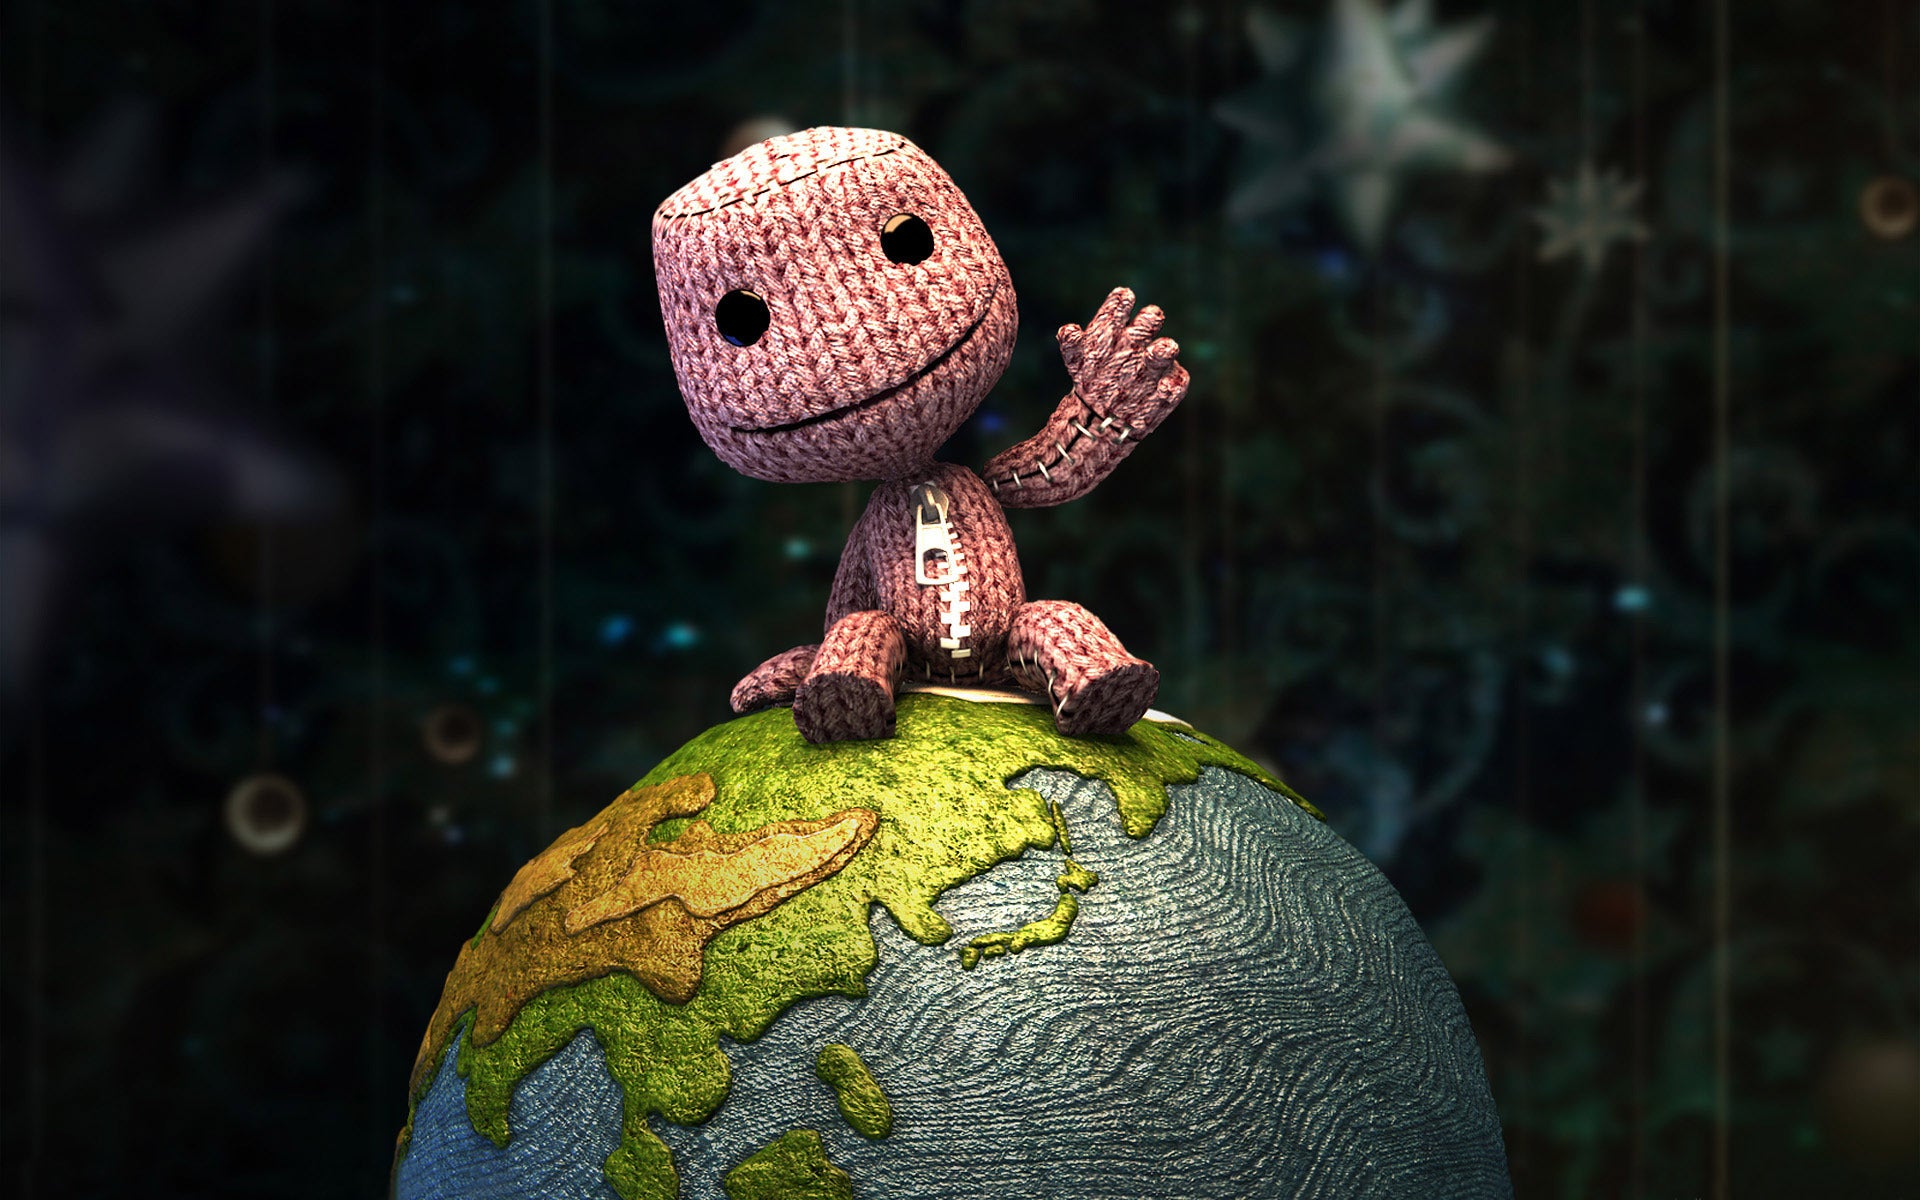 Image for Media Molecule: LittleBigPlanet would have really benefited from Early Access